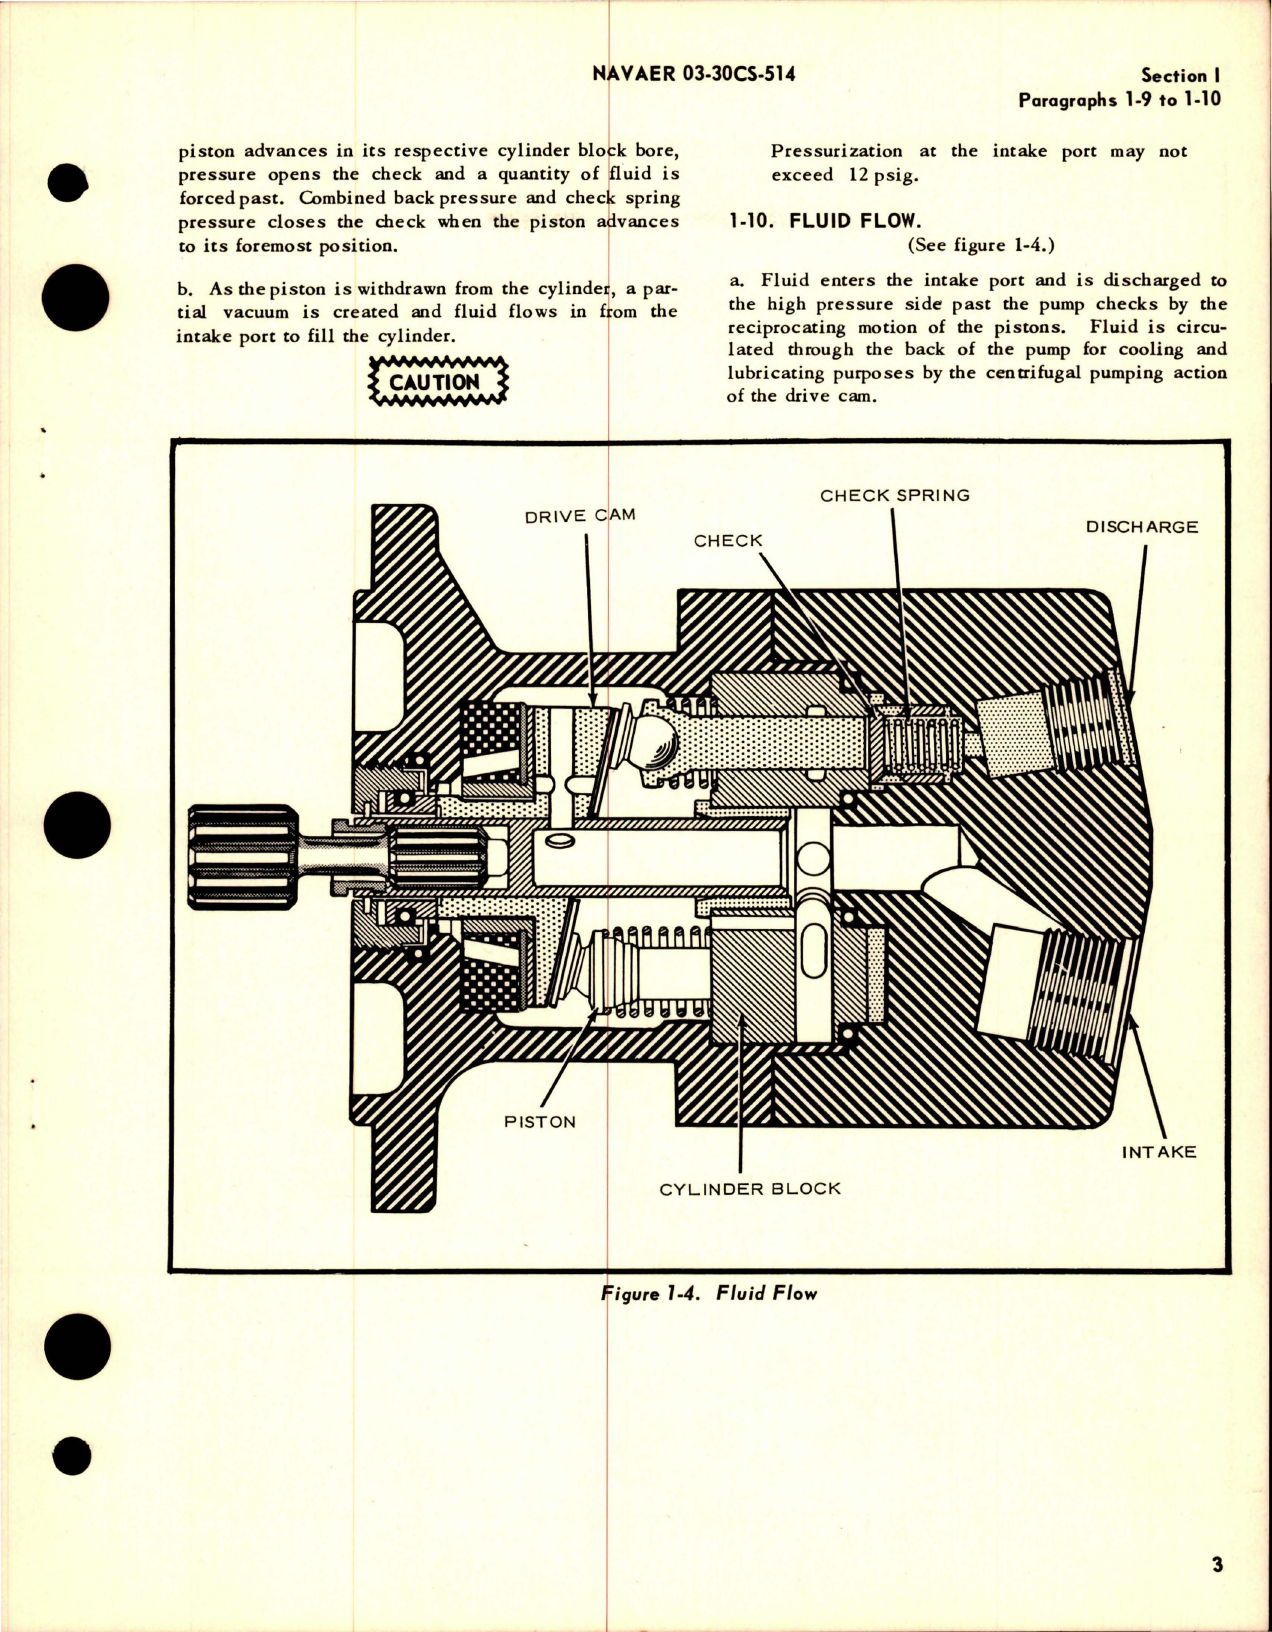 Sample page 7 from AirCorps Library document: Overhaul Instructions for Stratopower Hydraulic Pump - Model 67L300-1 